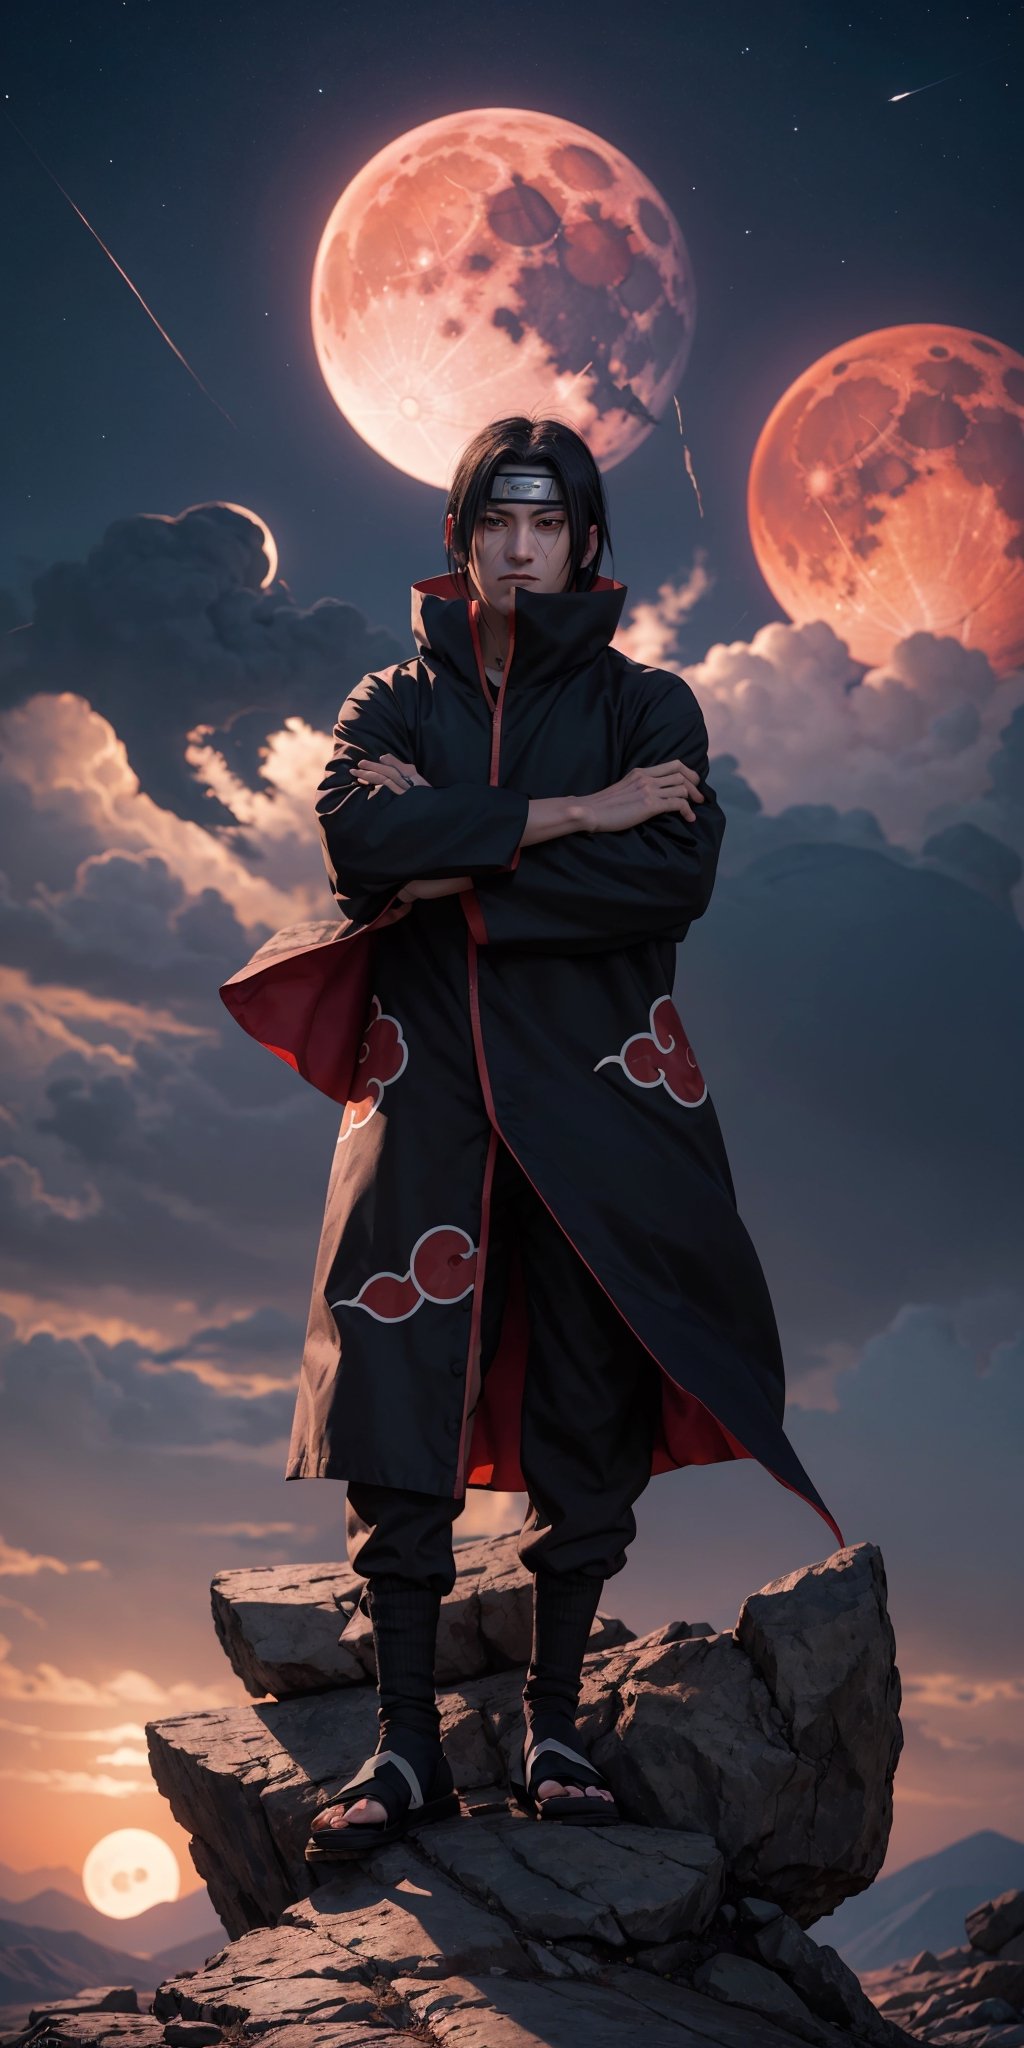 Picture a captivating scene with Itachi Uchiha from Naruto, seated stylishly on a rock against a night backdrop with a red moon. Request a 32k Ultra HDR high-quality image masterpiece, capturing the cool and iconic essence of Itachi Uchiha. Emphasize meticulous details in his posture and surroundings for a visually stunning composition. Aim for a high-quality image that reflects the cool and enigmatic character of Itachi Uchiha in this striking setting.